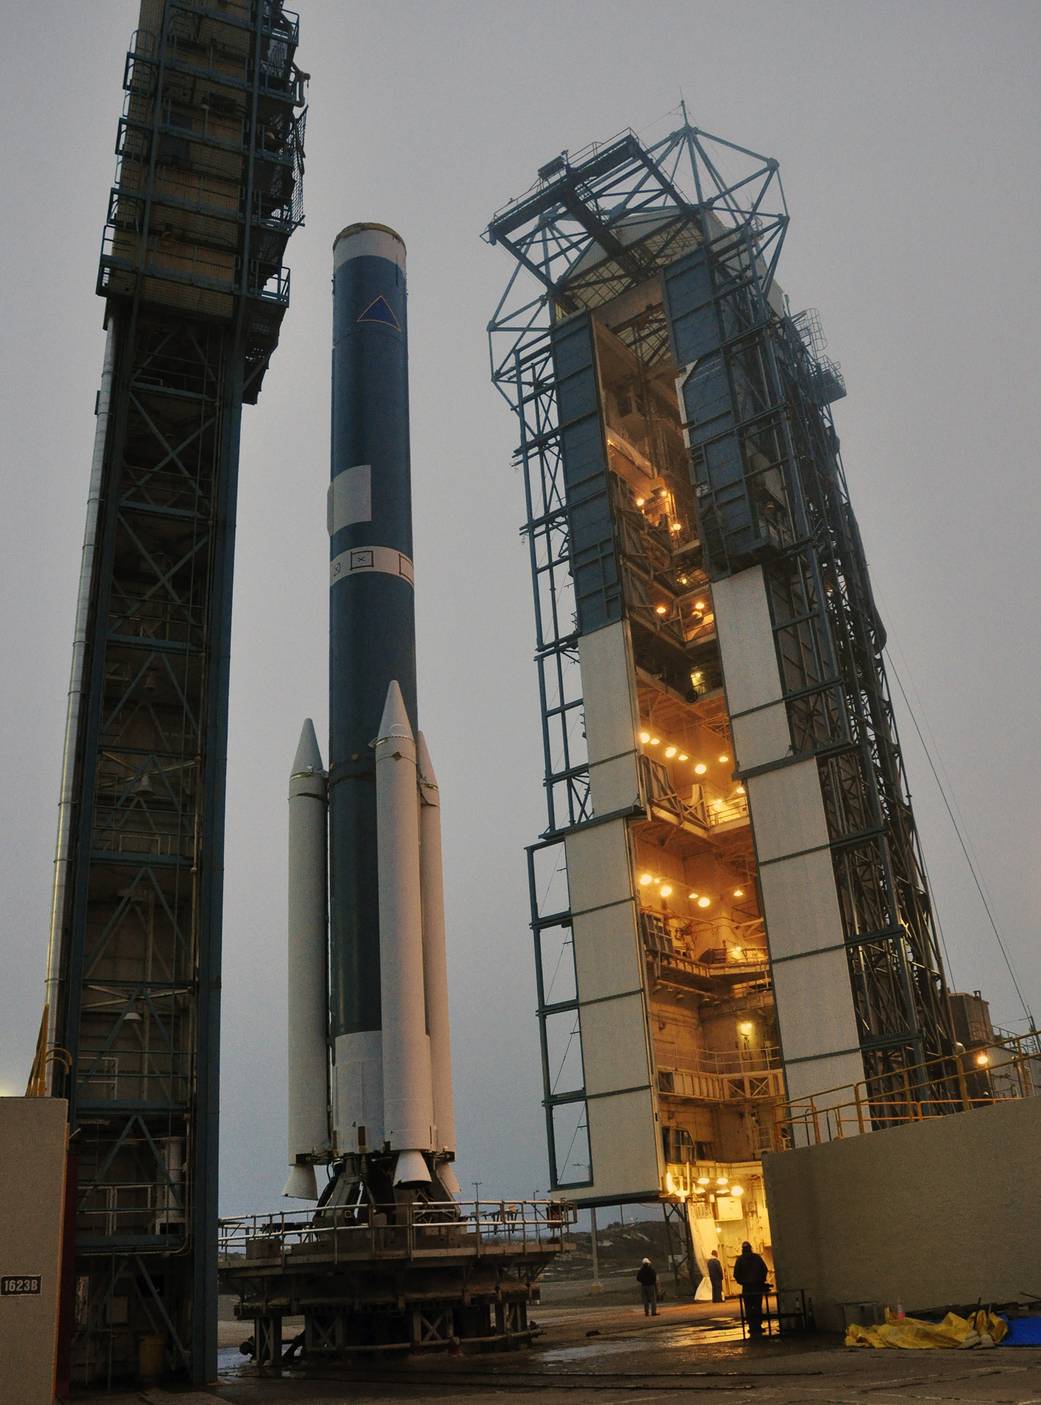 At Space Launch Complex 2 on Vandenberg Air Force Base in California, the mobile service tower rolls away from the launch stand 